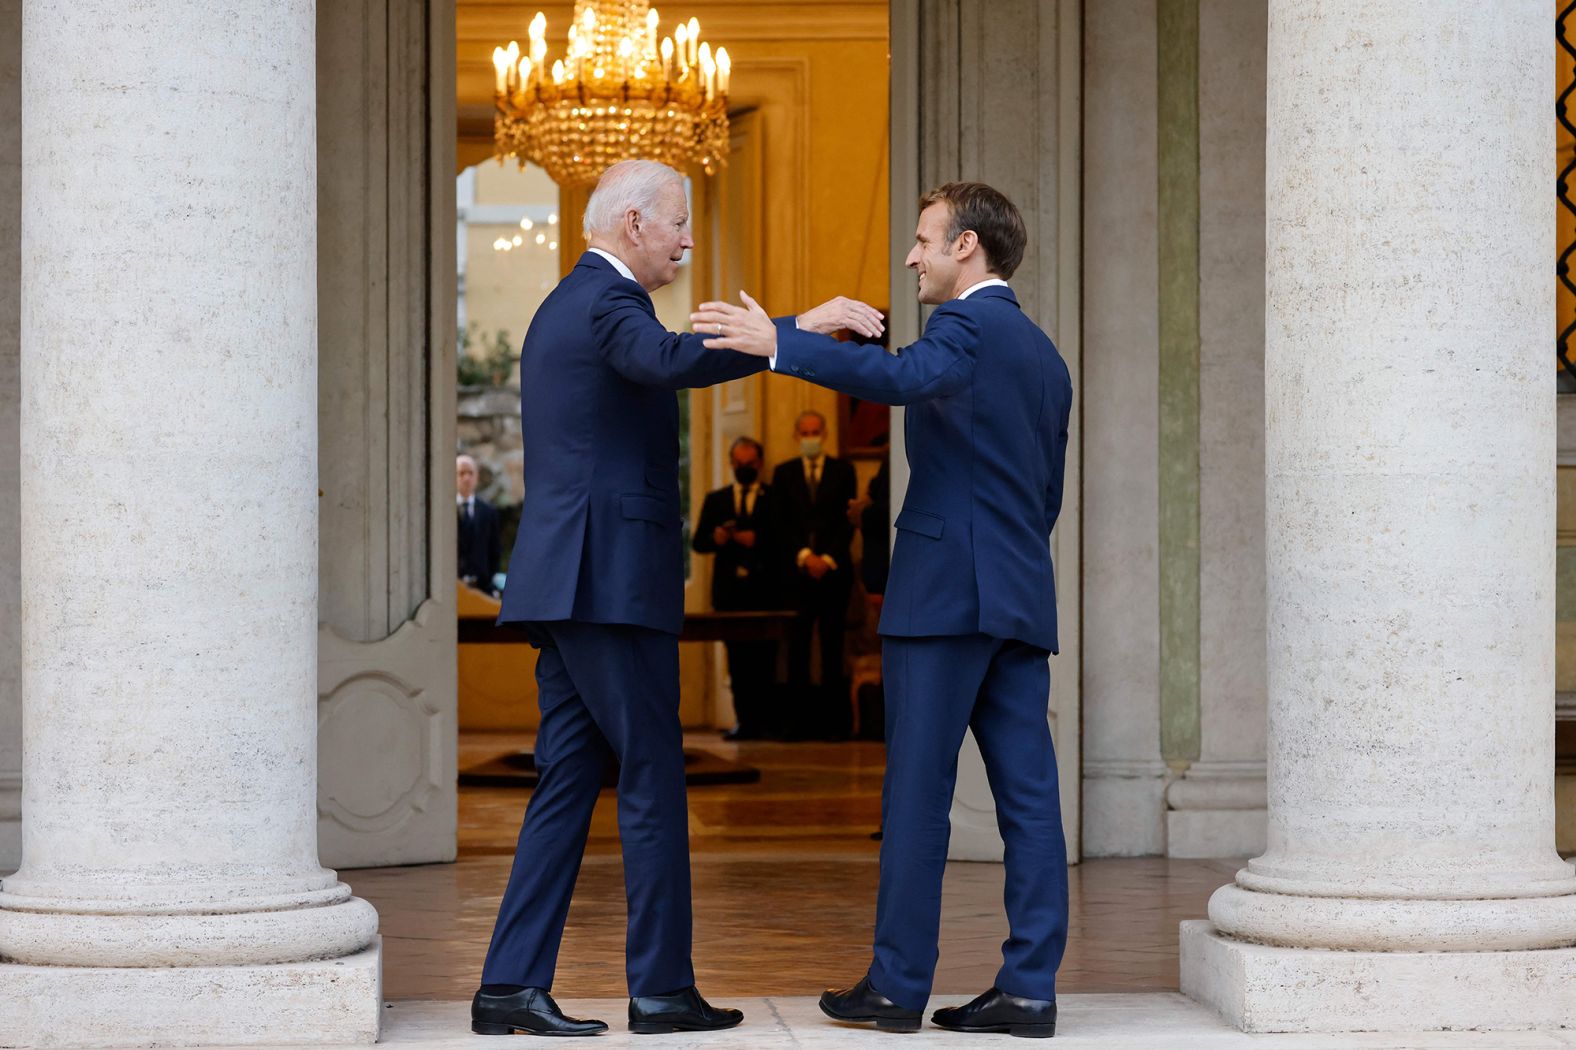 Macron welcomes Biden before their meeting at the French Embassy in Rome on Friday. During <a href="index.php?page=&url=https%3A%2F%2Fwww.cnn.com%2F2021%2F10%2F29%2Fpolitics%2Fmacron-biden-meeting-rome%2Findex.html" target="_blank">their meeting,</a> Biden admitted that his administration was "clumsy" in its handling of the deal that deprived France of billions in defense contracts. Macron emphasized that "what really matters now is what we will do together in the coming weeks, the coming months, the coming years."